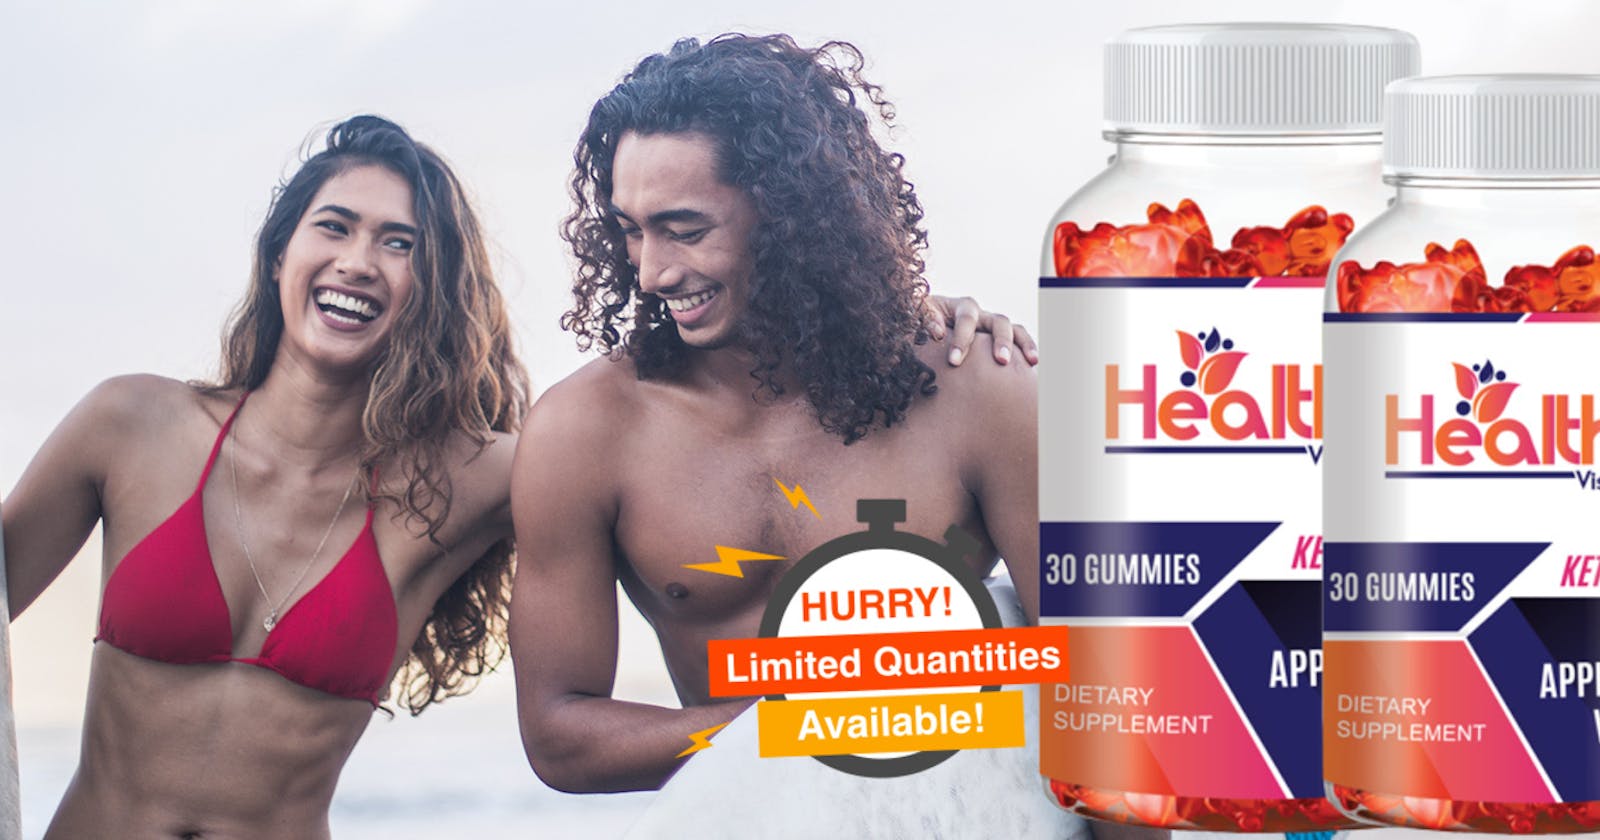 Healthy Visions Keto Gummies To Support Metabolism, Fat Burn & Weight Loss [Offer Sale UPTO 60%](Spam Or Legit)